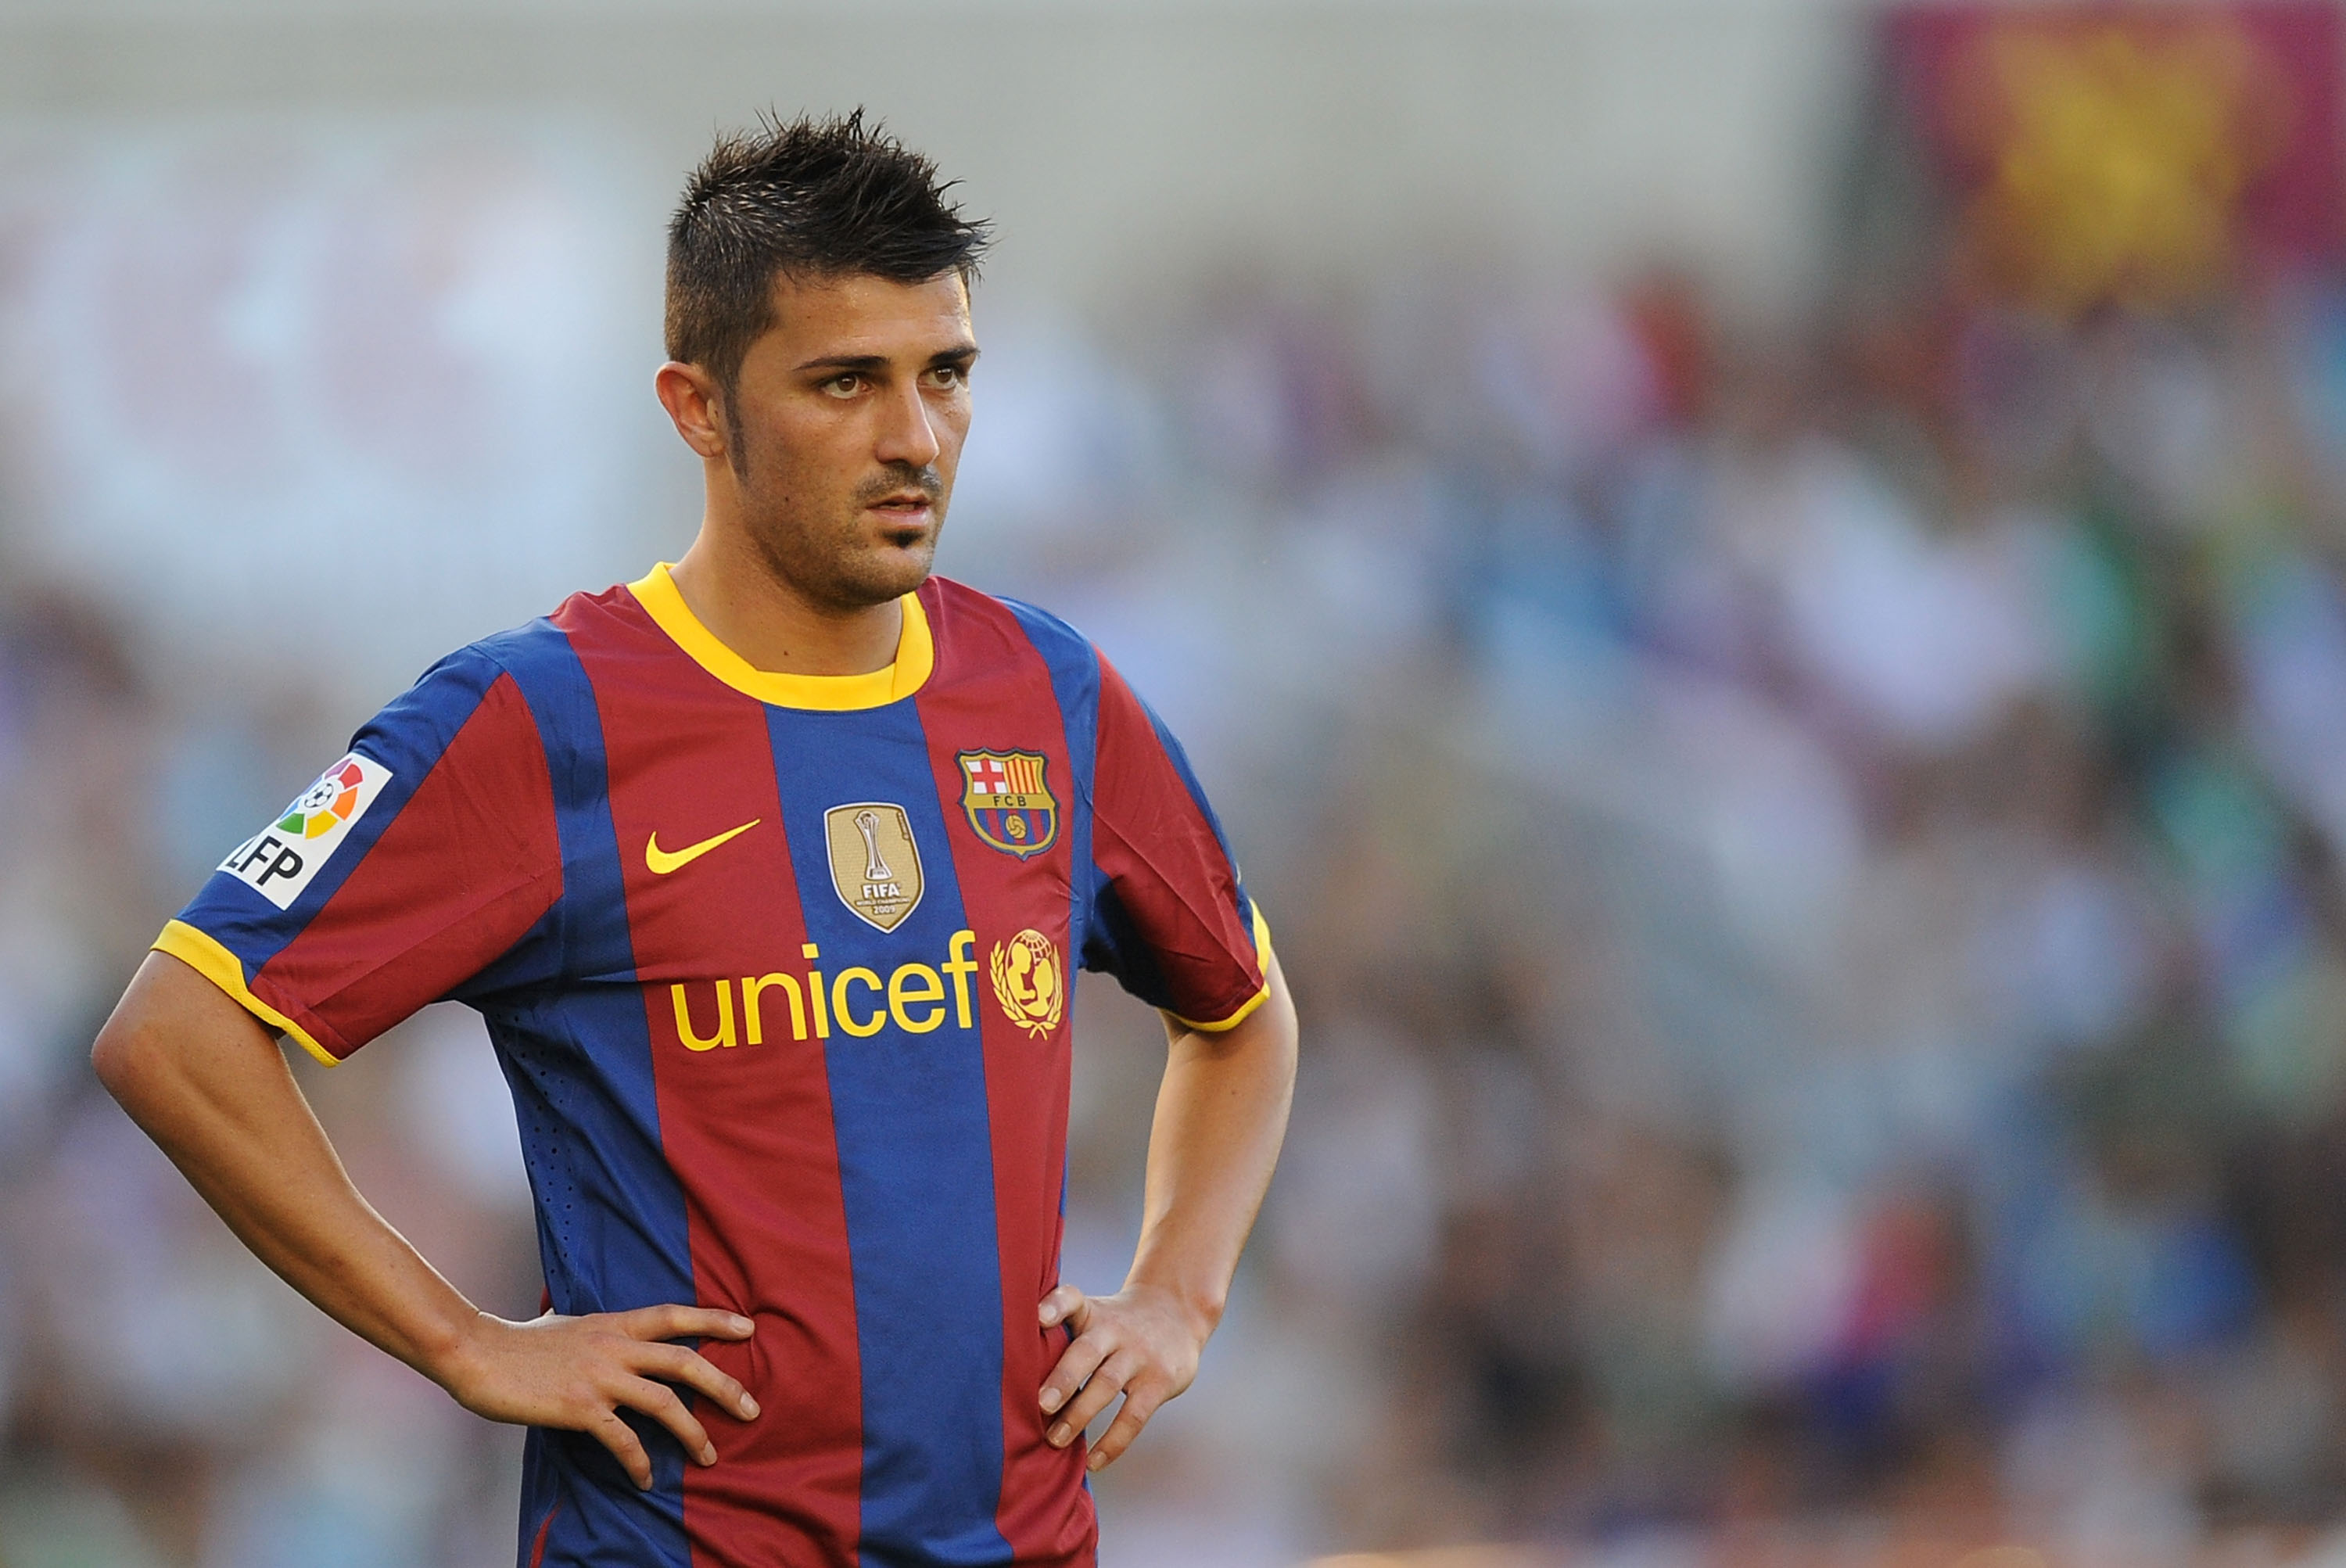 SANTANDER, SPAIN - AUGUST 29:  David Villa of Barcelona waits for play to resume during the La Liga match between Racing Santander and Barcelona at El Sardinero stadium on August 29, 2010 in Santander, Spain. (Photo by Denis Doyle/Getty Images)